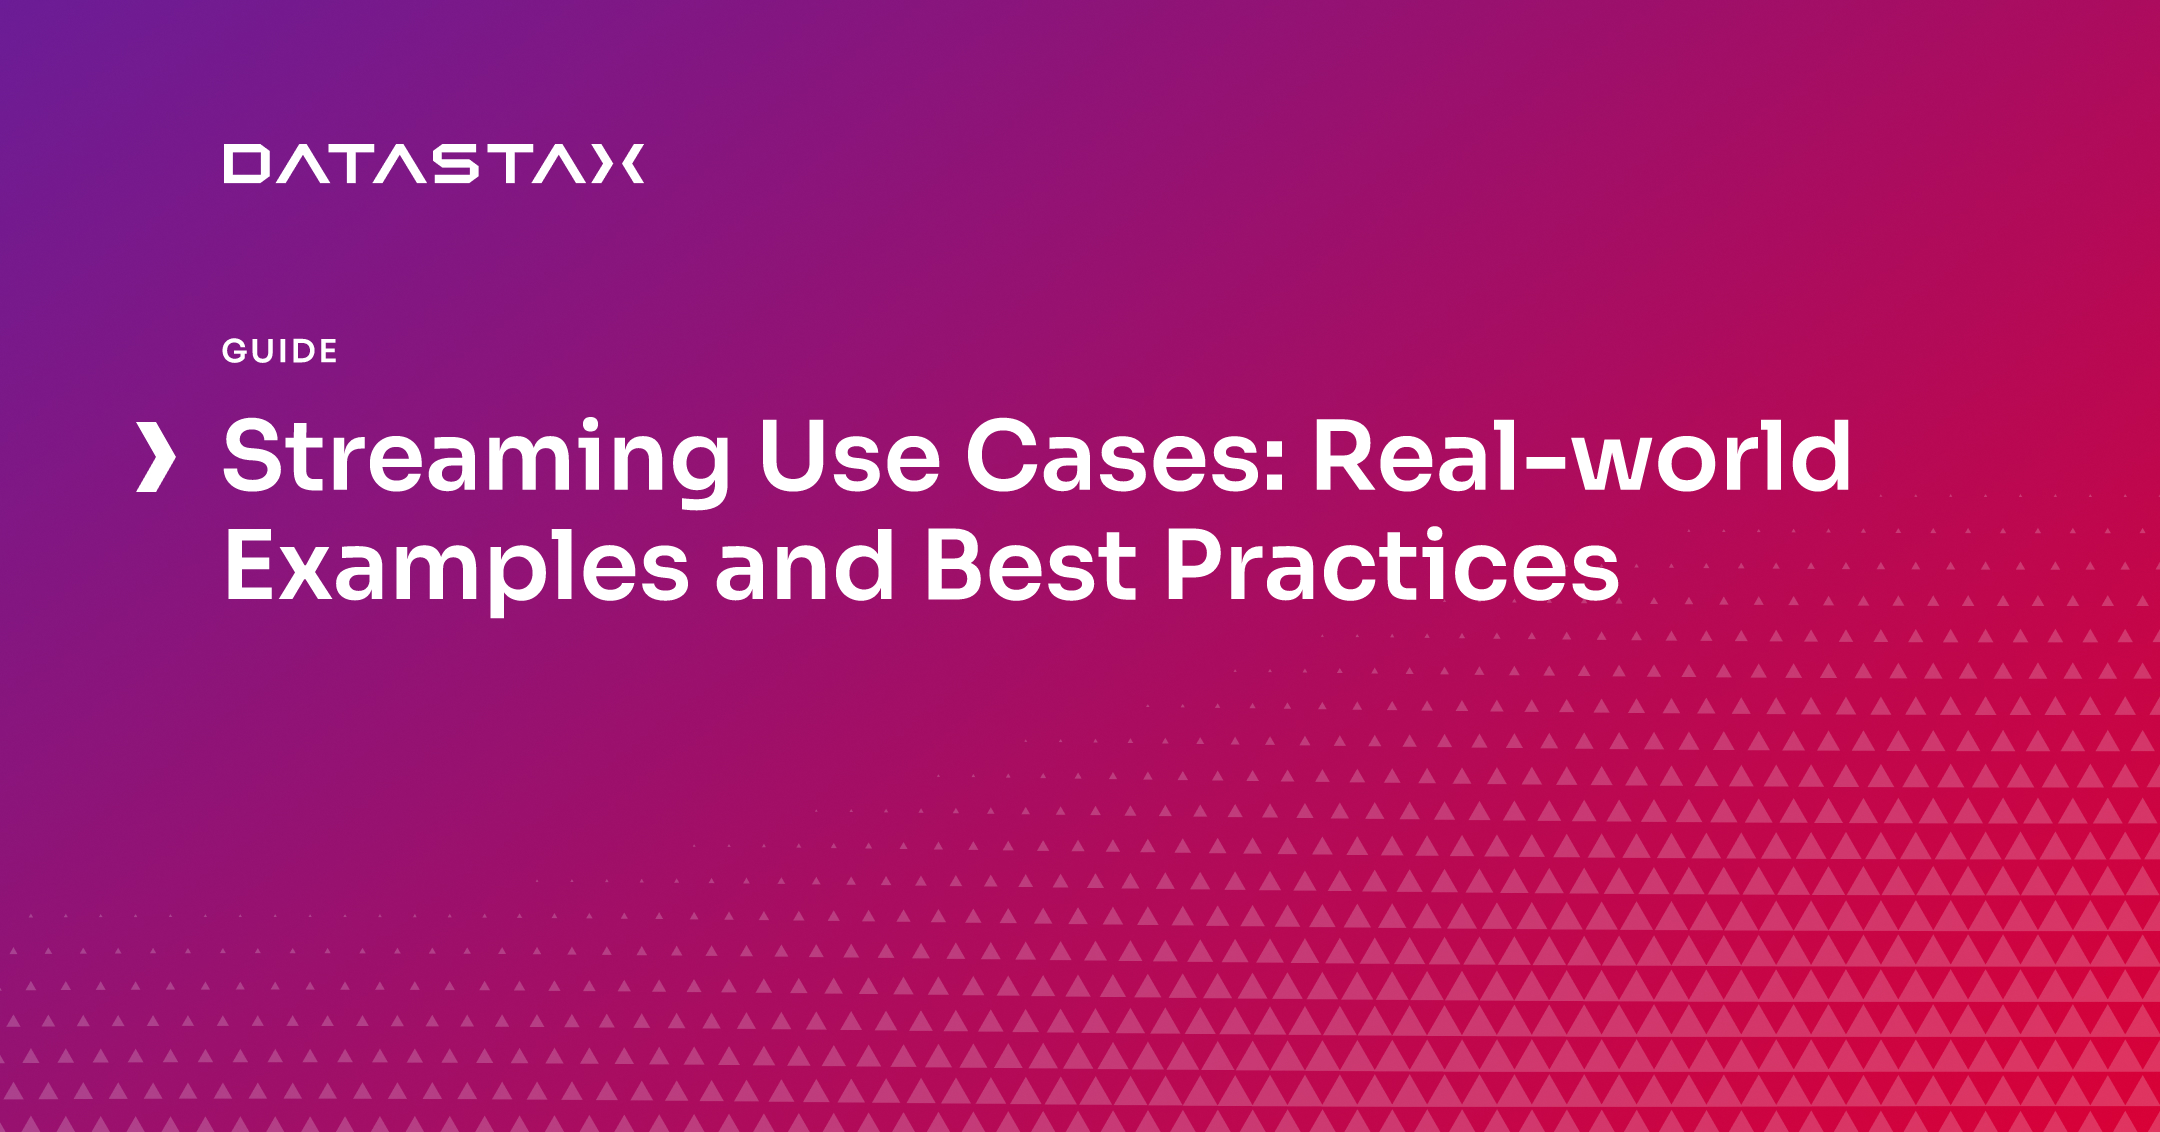 Streaming Use Cases: Real-world Examples and Best Practices